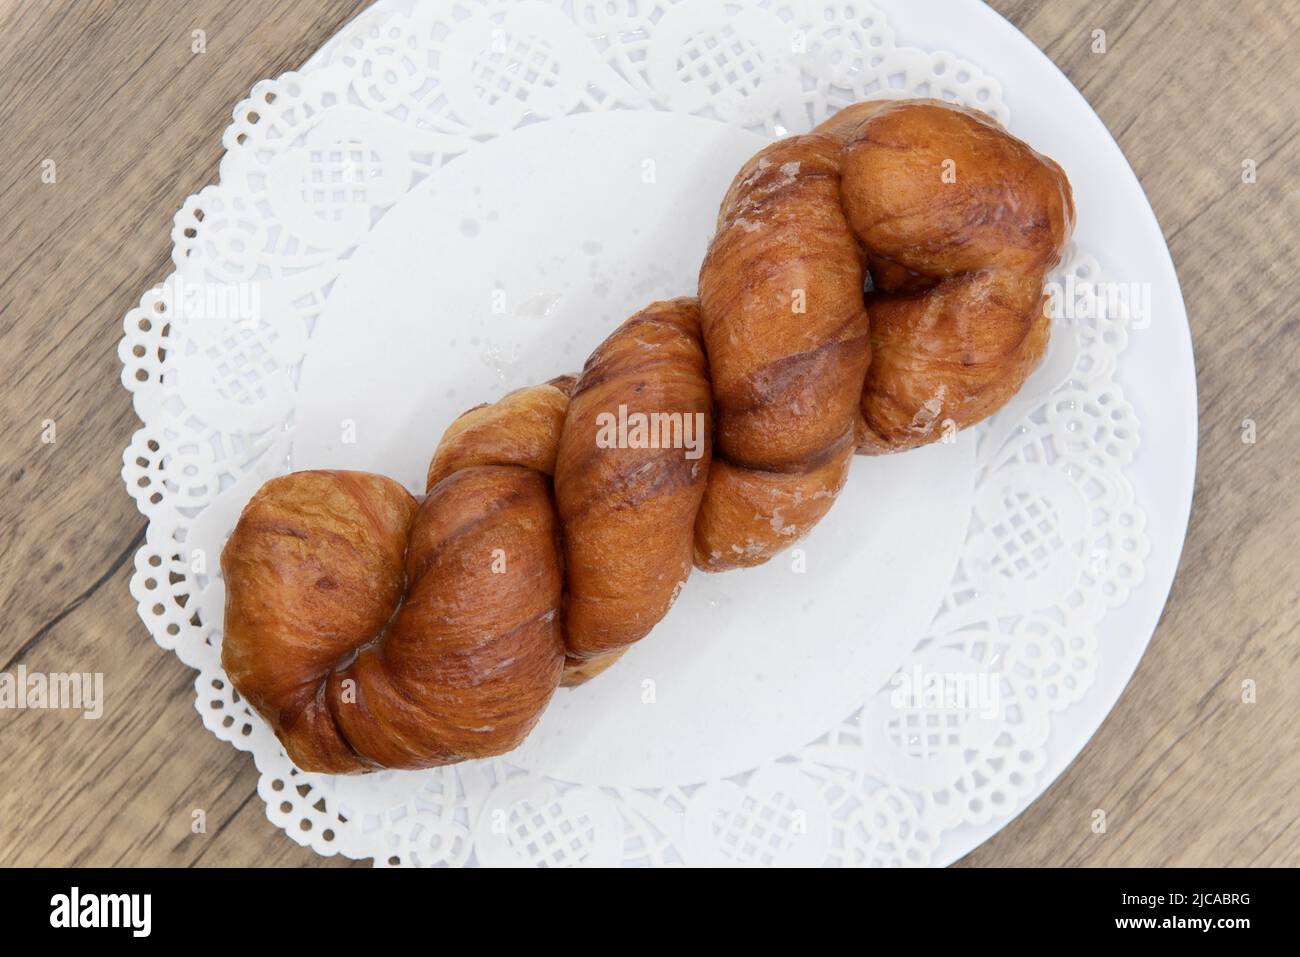 Overhead view of tempting fresh from the oven cinnamon twist donut from the bakery served on a plate. Stock Photo